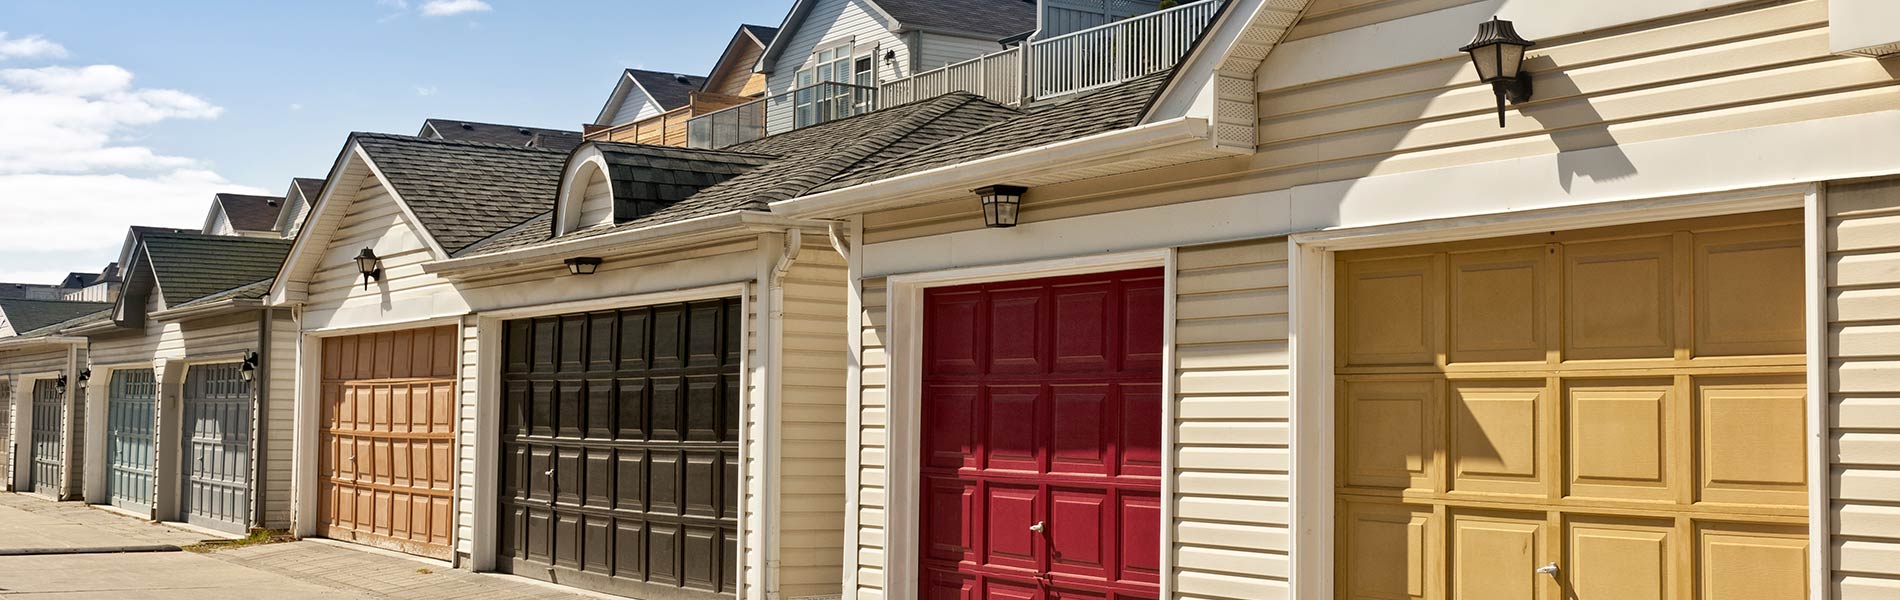 Unique Garage Door Company Rochester Ny for Large Space